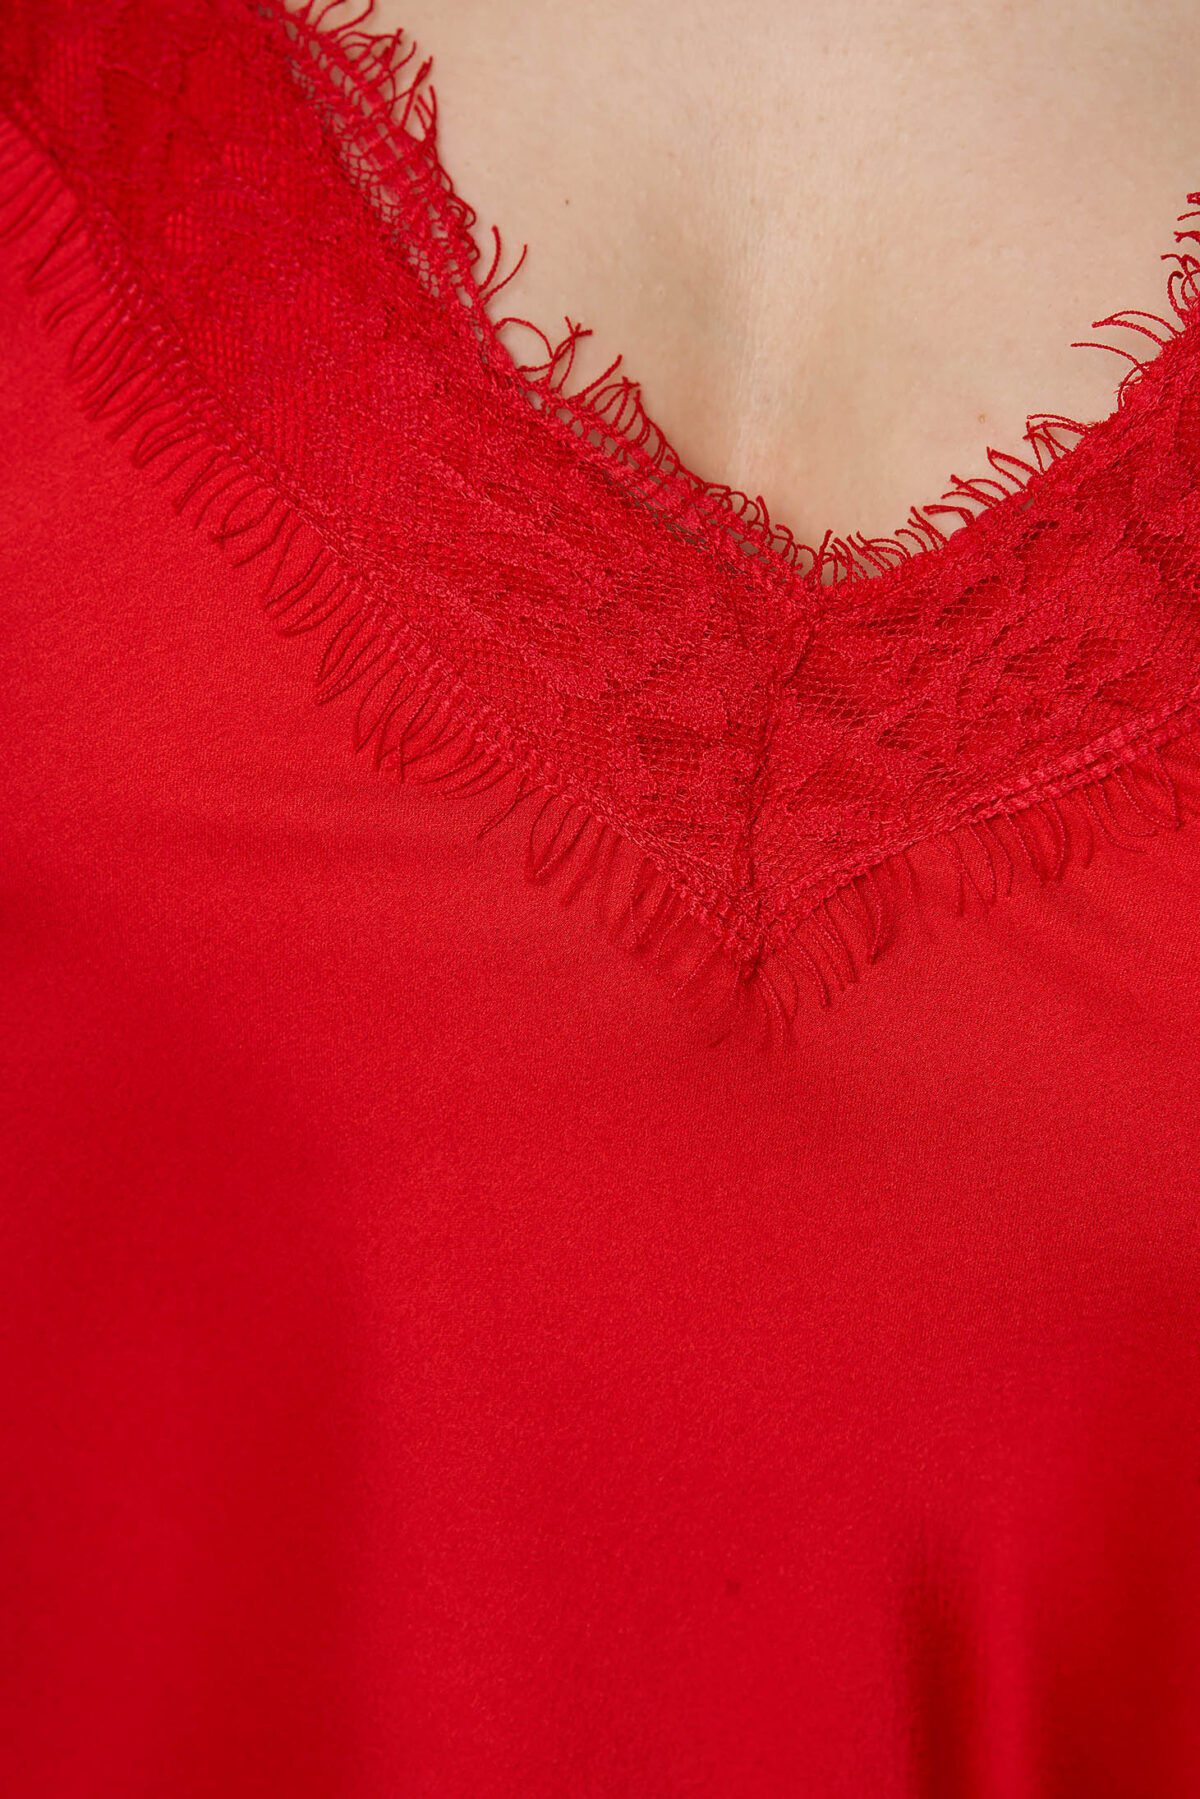 Red Top Shirt Loose Fit From Satin With Straps With Lace Details.